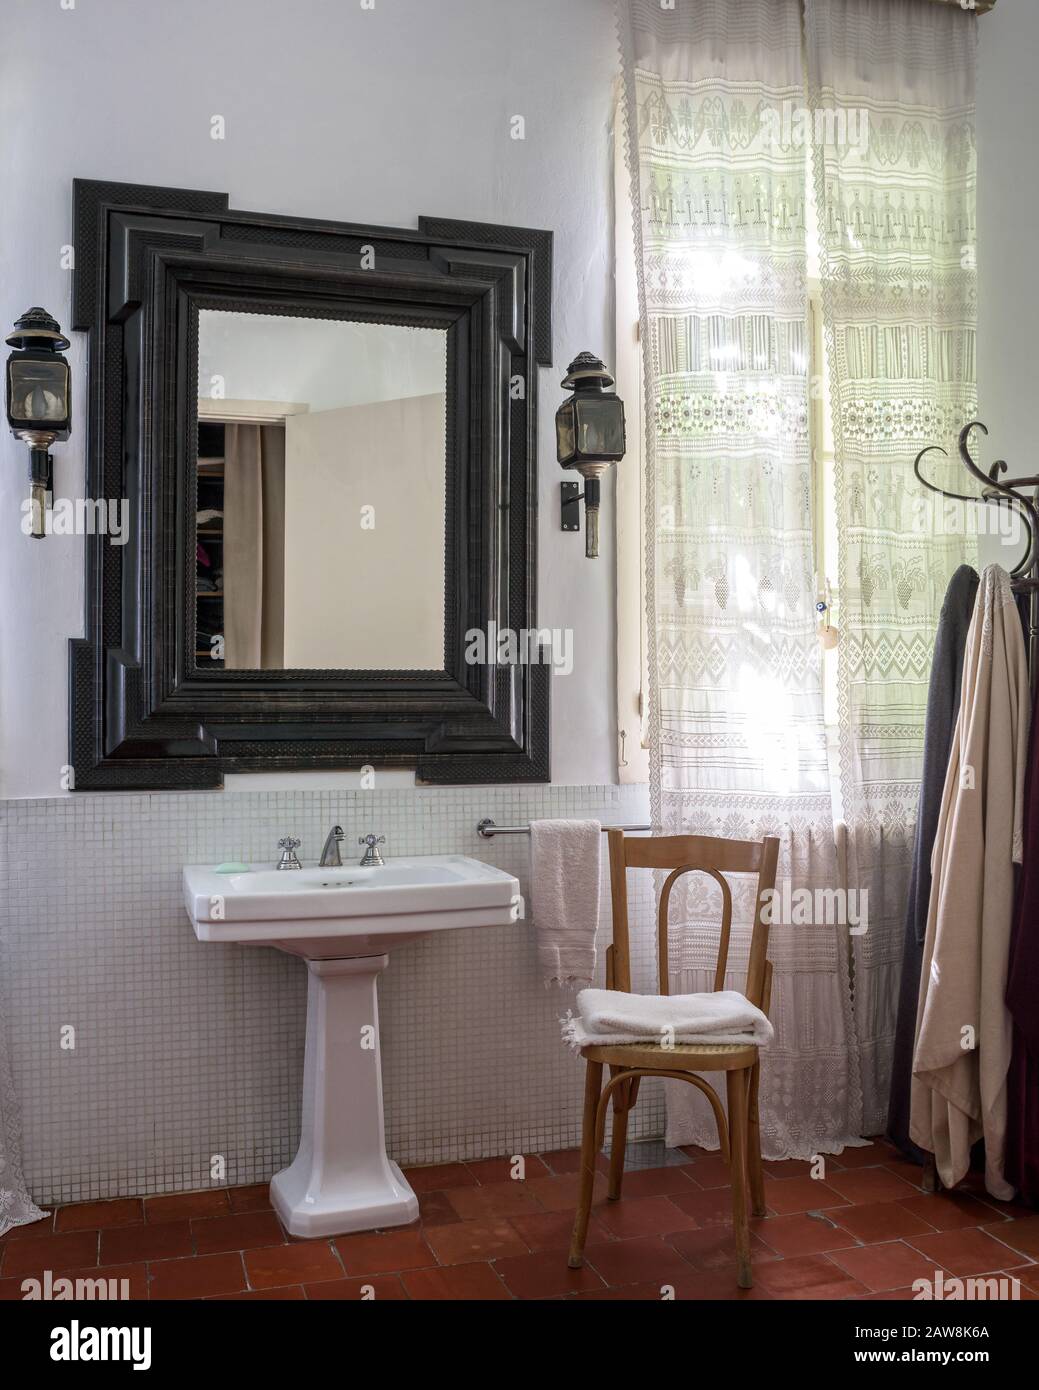 Mirror over washbasin in country style bathroom Stock Photo